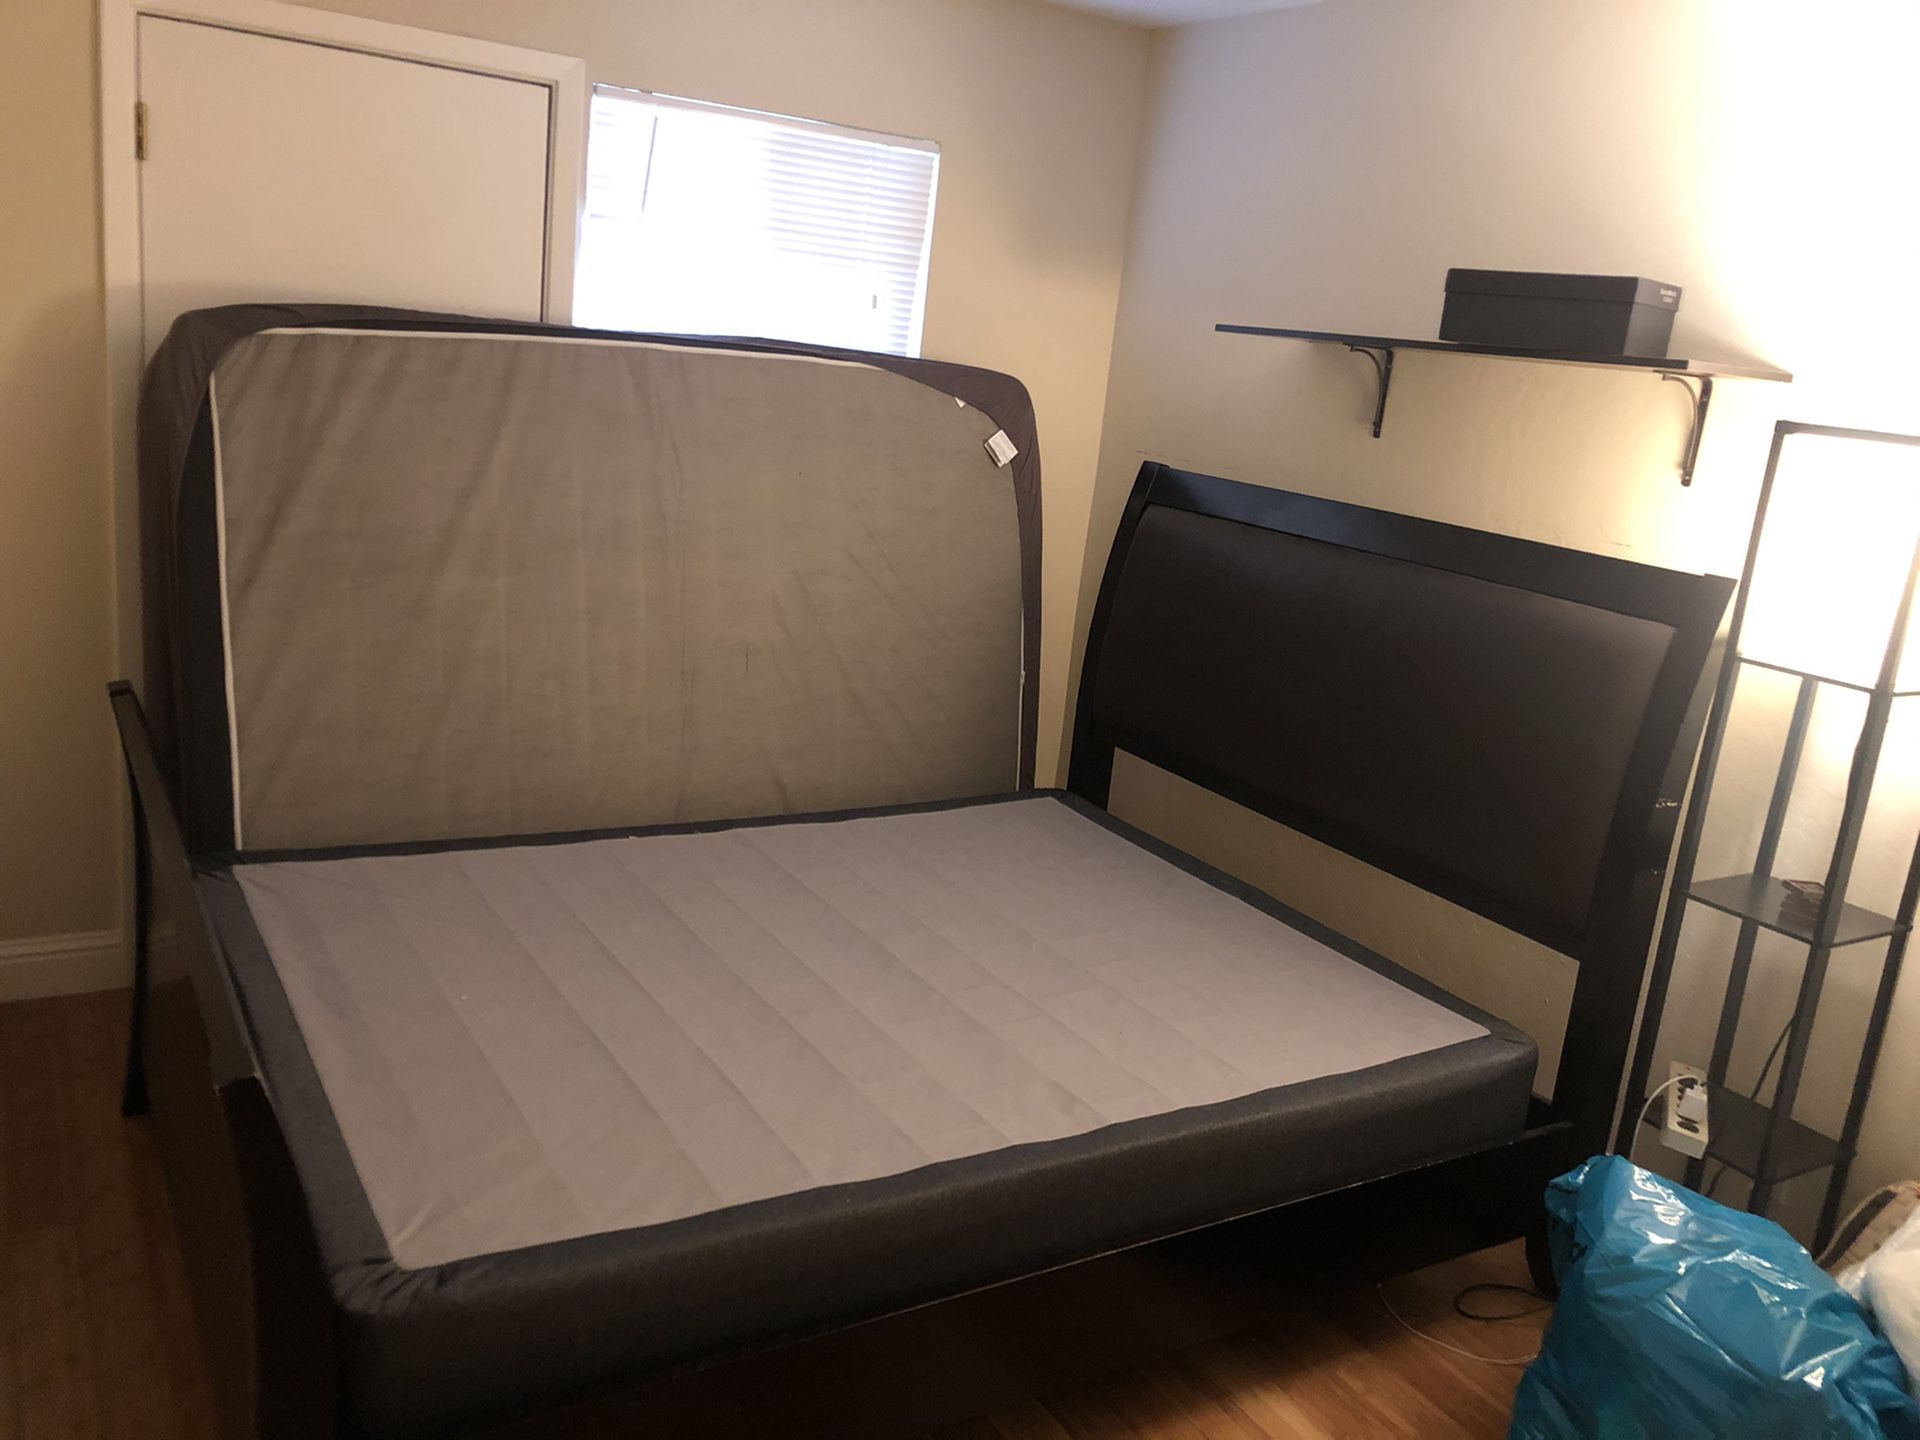 Queen size bed frame. Good condition. Free delivery in San Fransisco in the next 3 hours